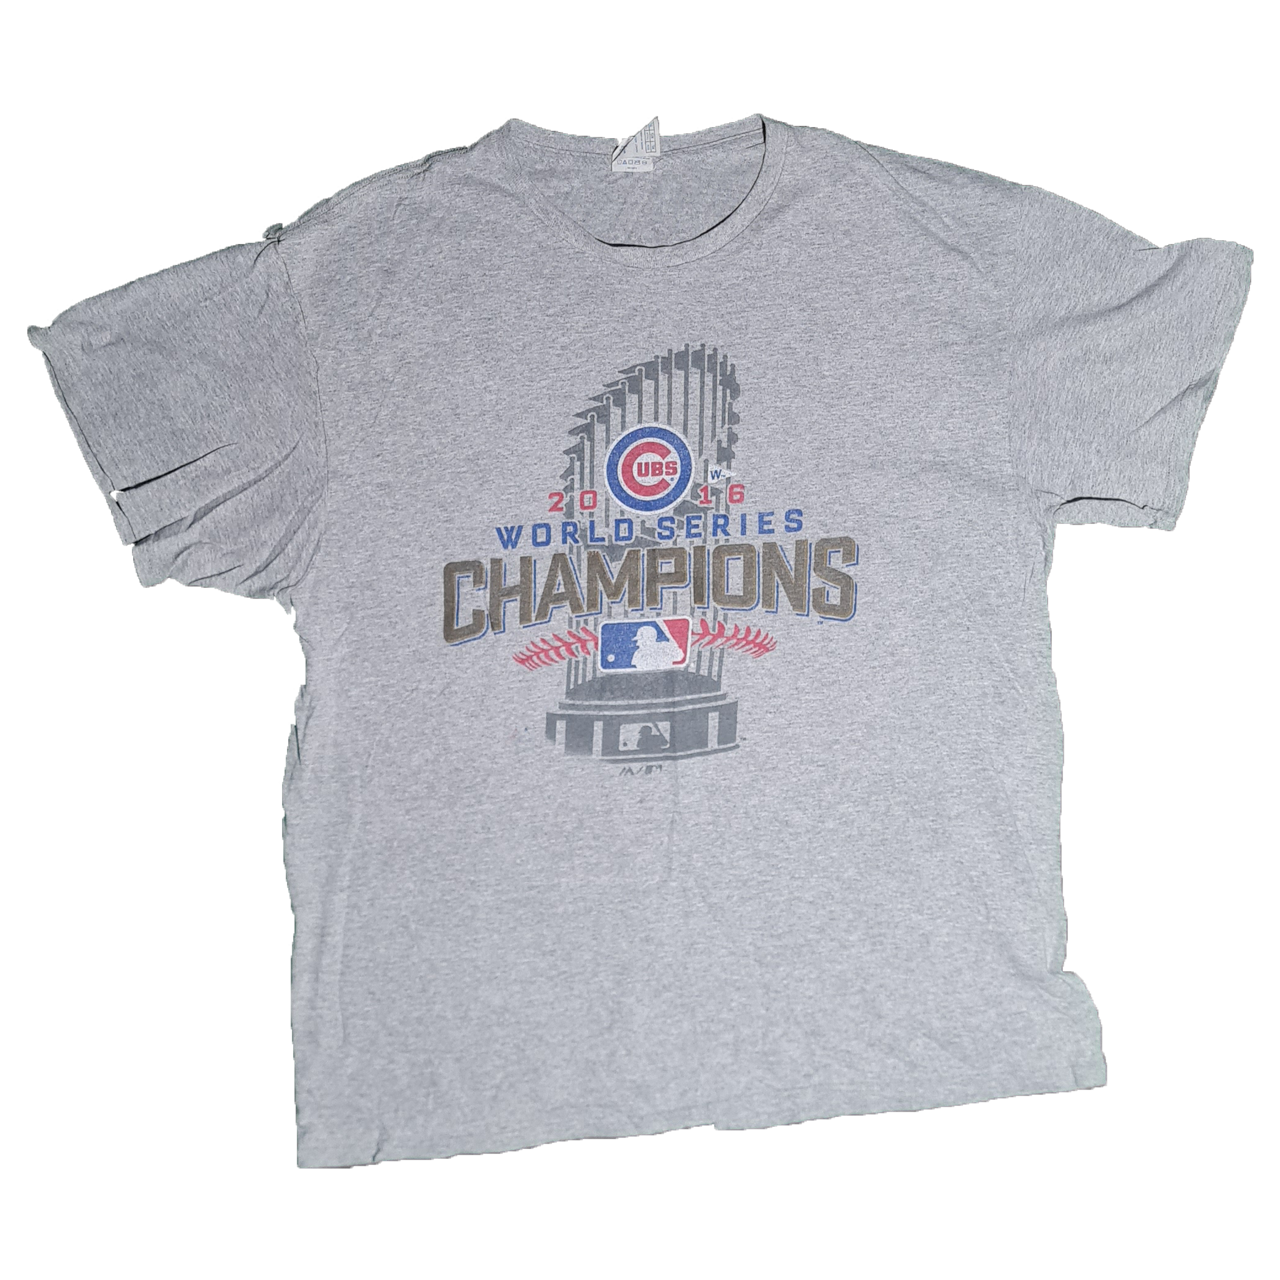 Chicago Cubs 2016 World Series Champions 9th Inning Long Sleeve T-Shirt -  Royal